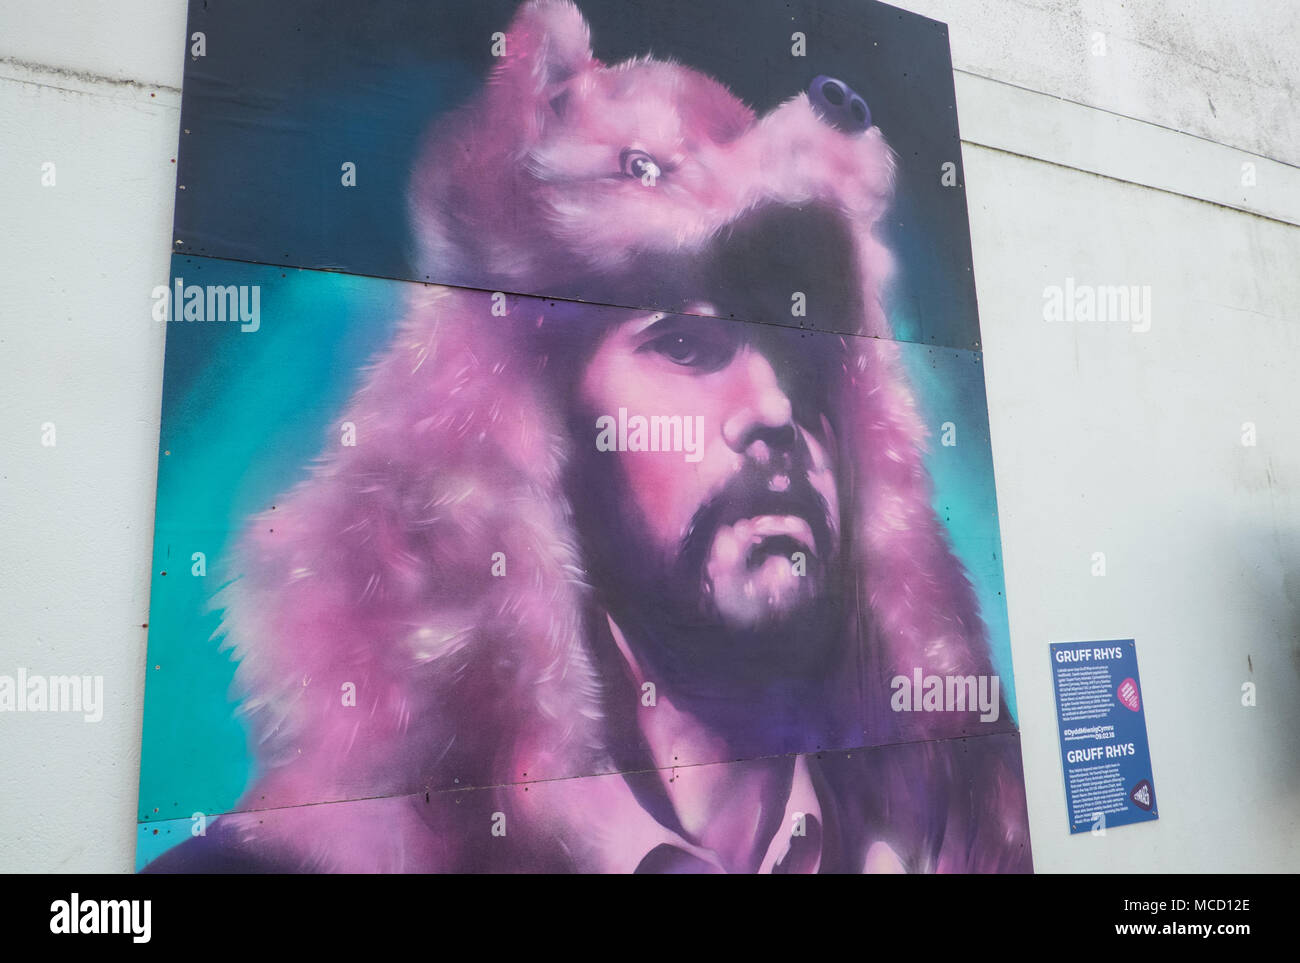 Large,poster,of,Gruff Rhys,musician,band,Super Furry Animals,singer,product,birthplace,of,Haverfordwest,Pembrokeshire,West,Wales,Wales,Welsh,UK,U.K., Stock Photo